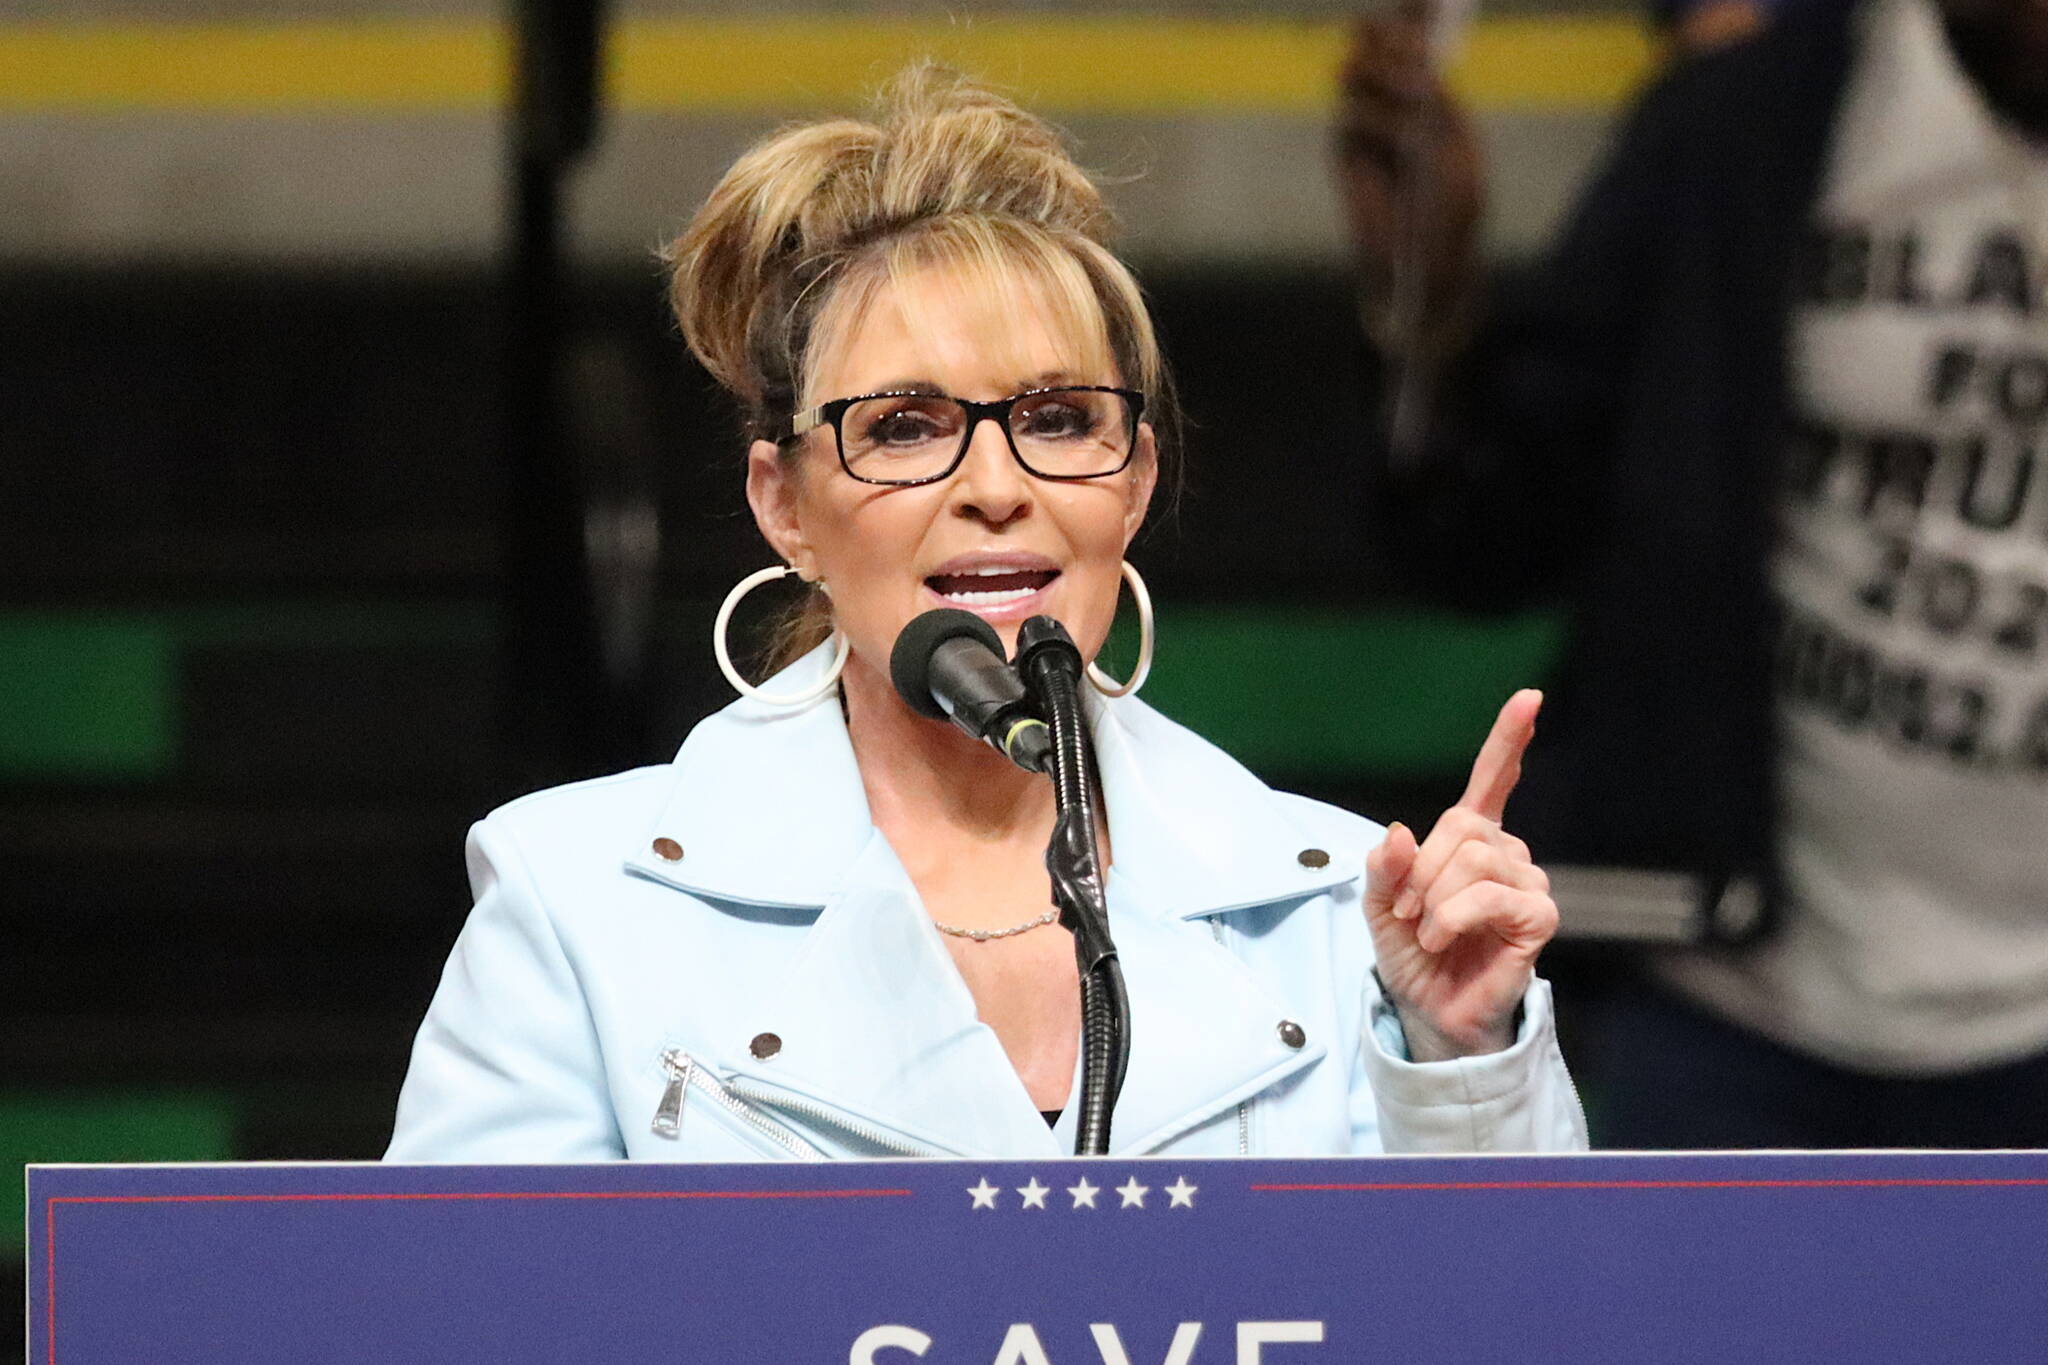 Sarah Palin speaks at a July 11 Save America Rally featuring former President Donald Trump at Alaska Airlines Center in Anchorage. (Mark Sabbatini / Juneau Empire)